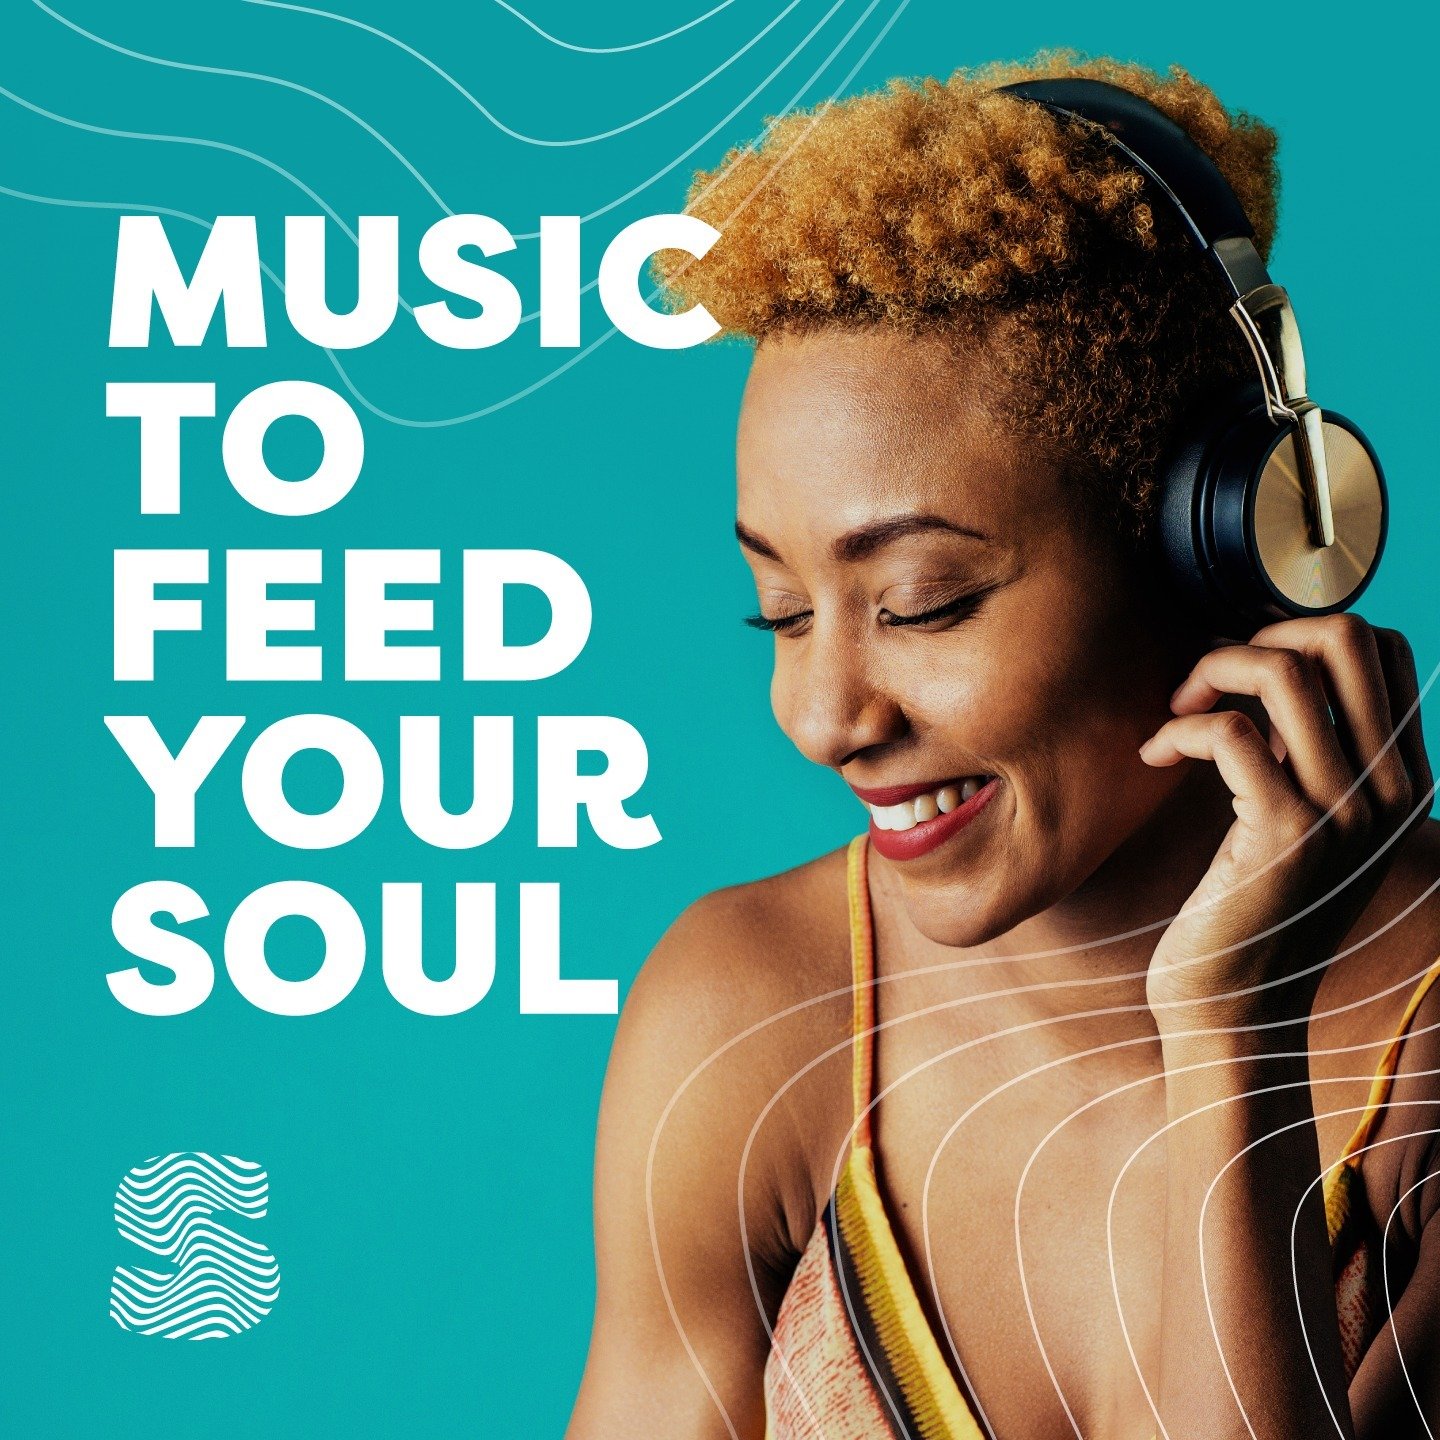 Soul Breeze - an online radio station with a refreshing approach and a targeted focus on the Anglo-Saxon market. Rebranding became essential to align with the brand's strategy.

The outcome materialized in an organic, lively, and rhythmic visual lang